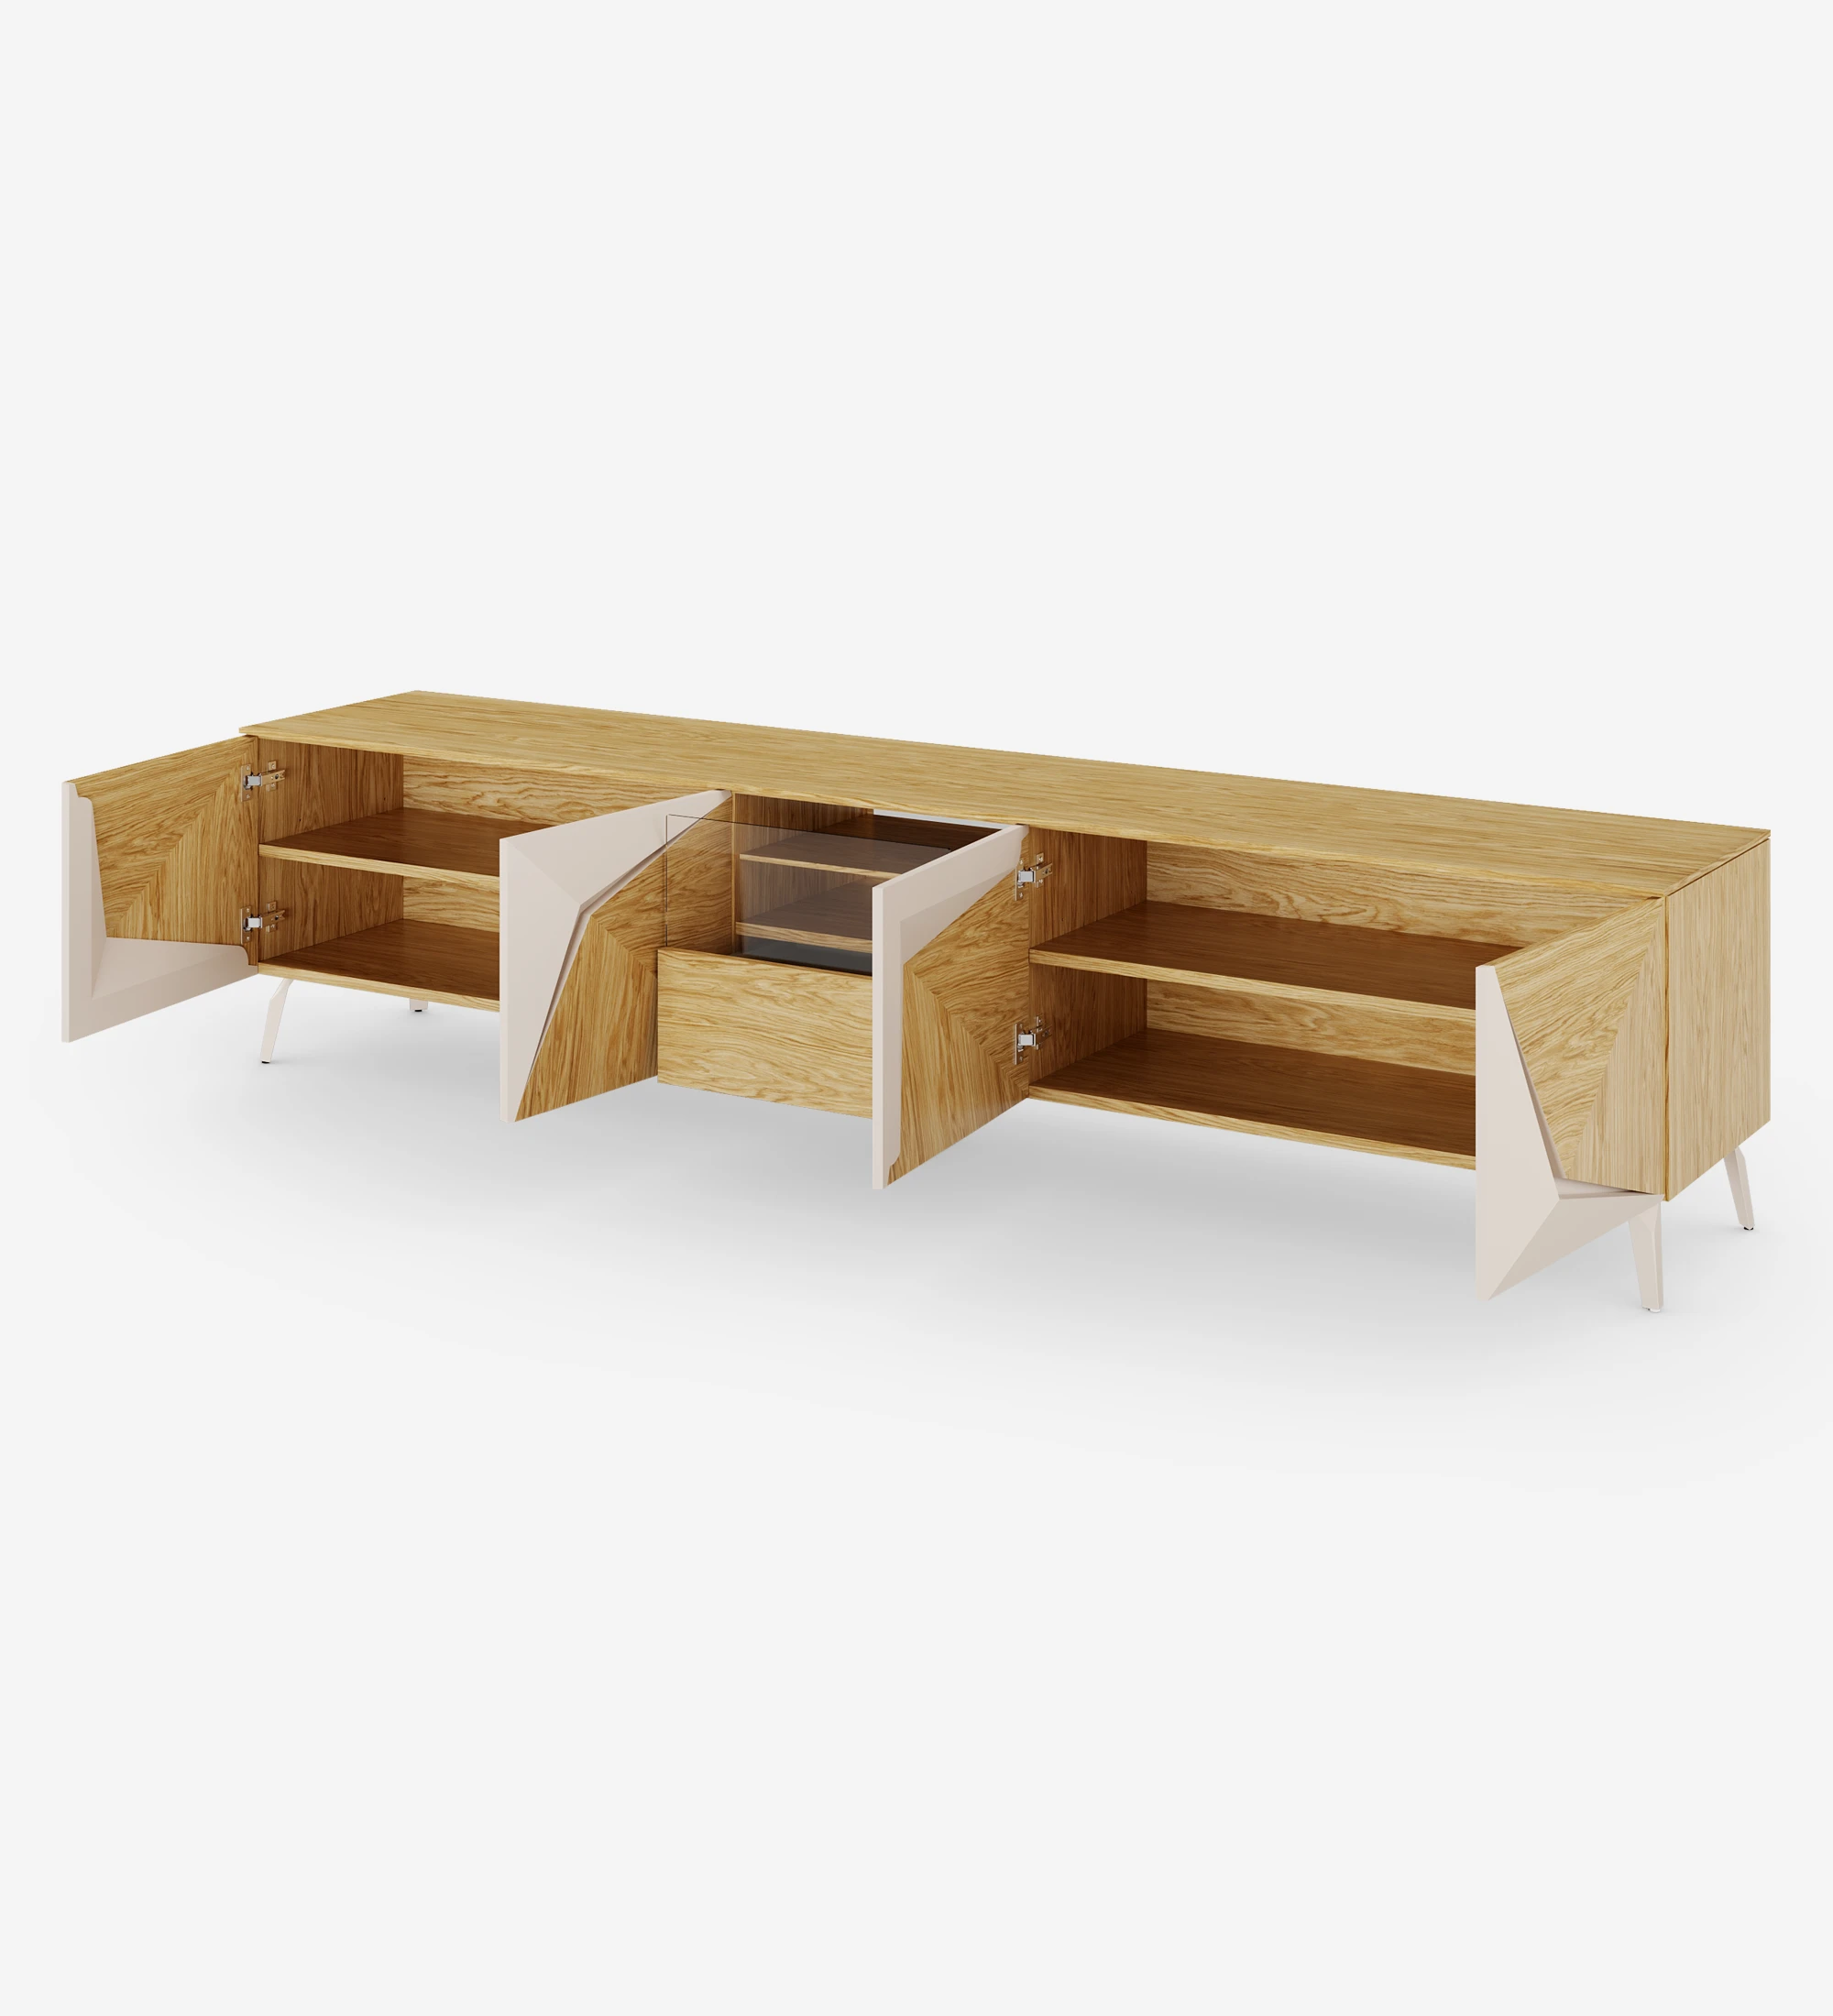 Évora TV stand with 4 doors and a drawer in natural oak with pearl details on the doors, with natural oak structure and metal foot lacquered in pearl.